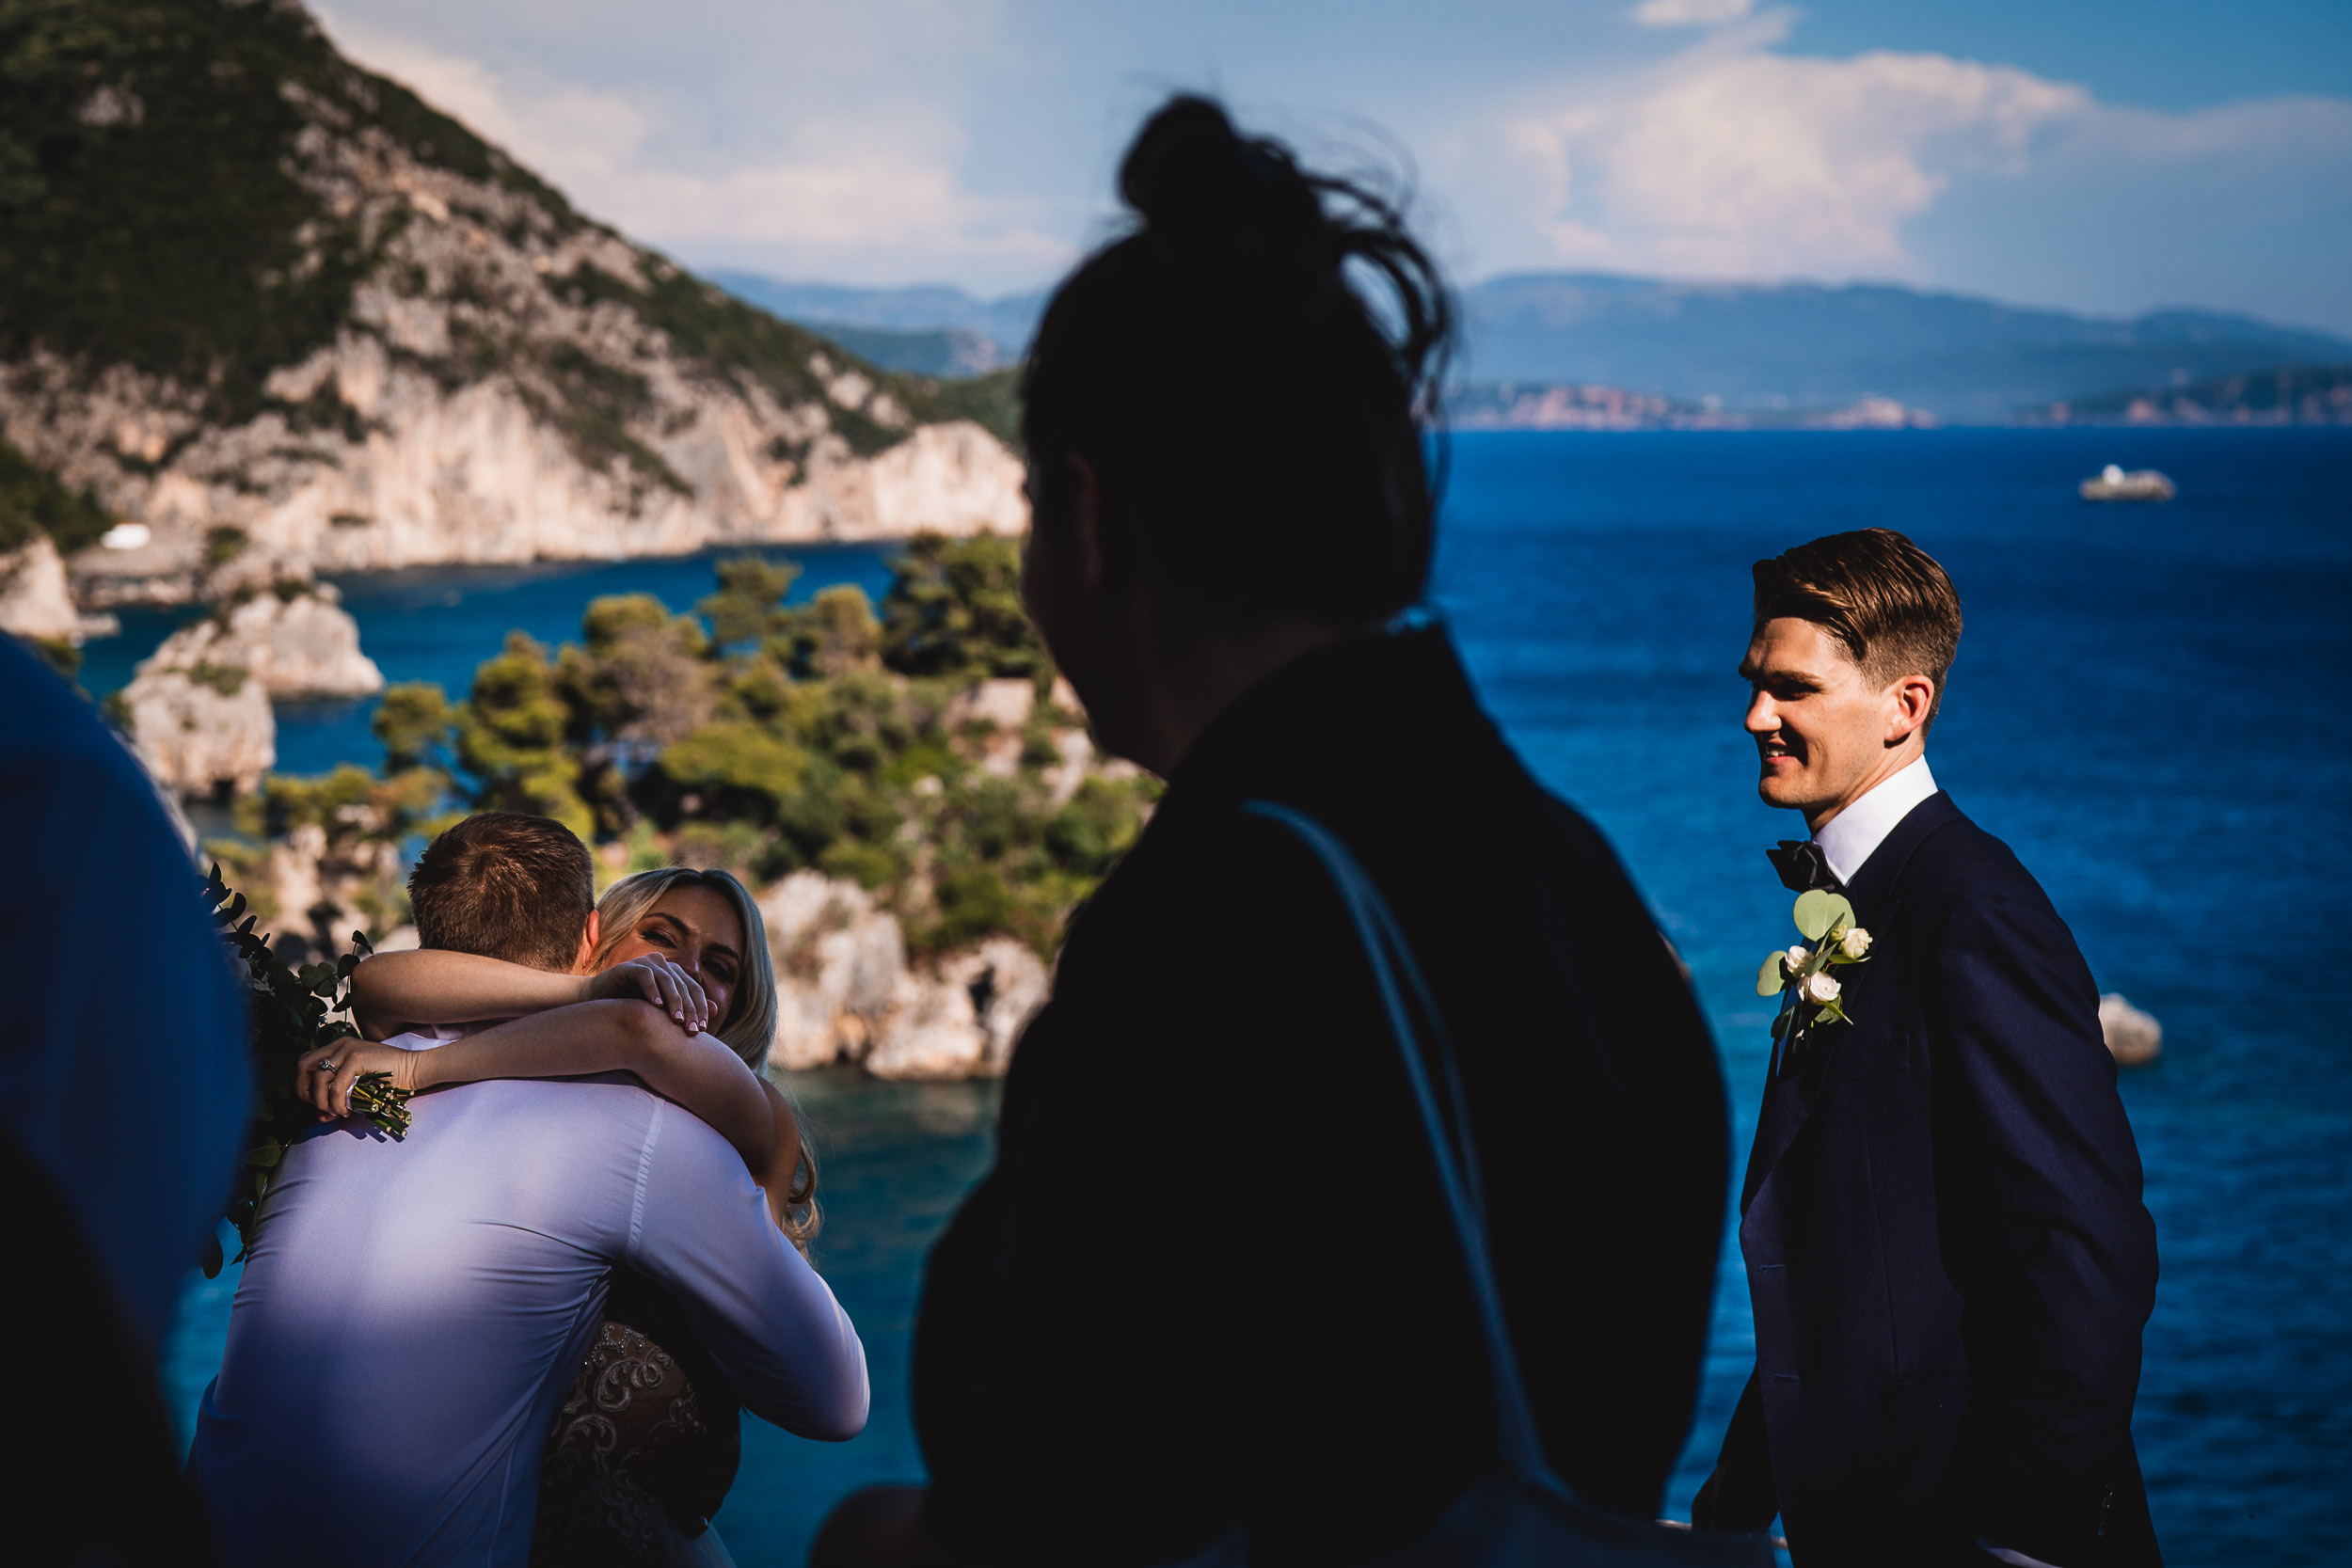 A wedding couple standing on a cliff overlooking the sea.